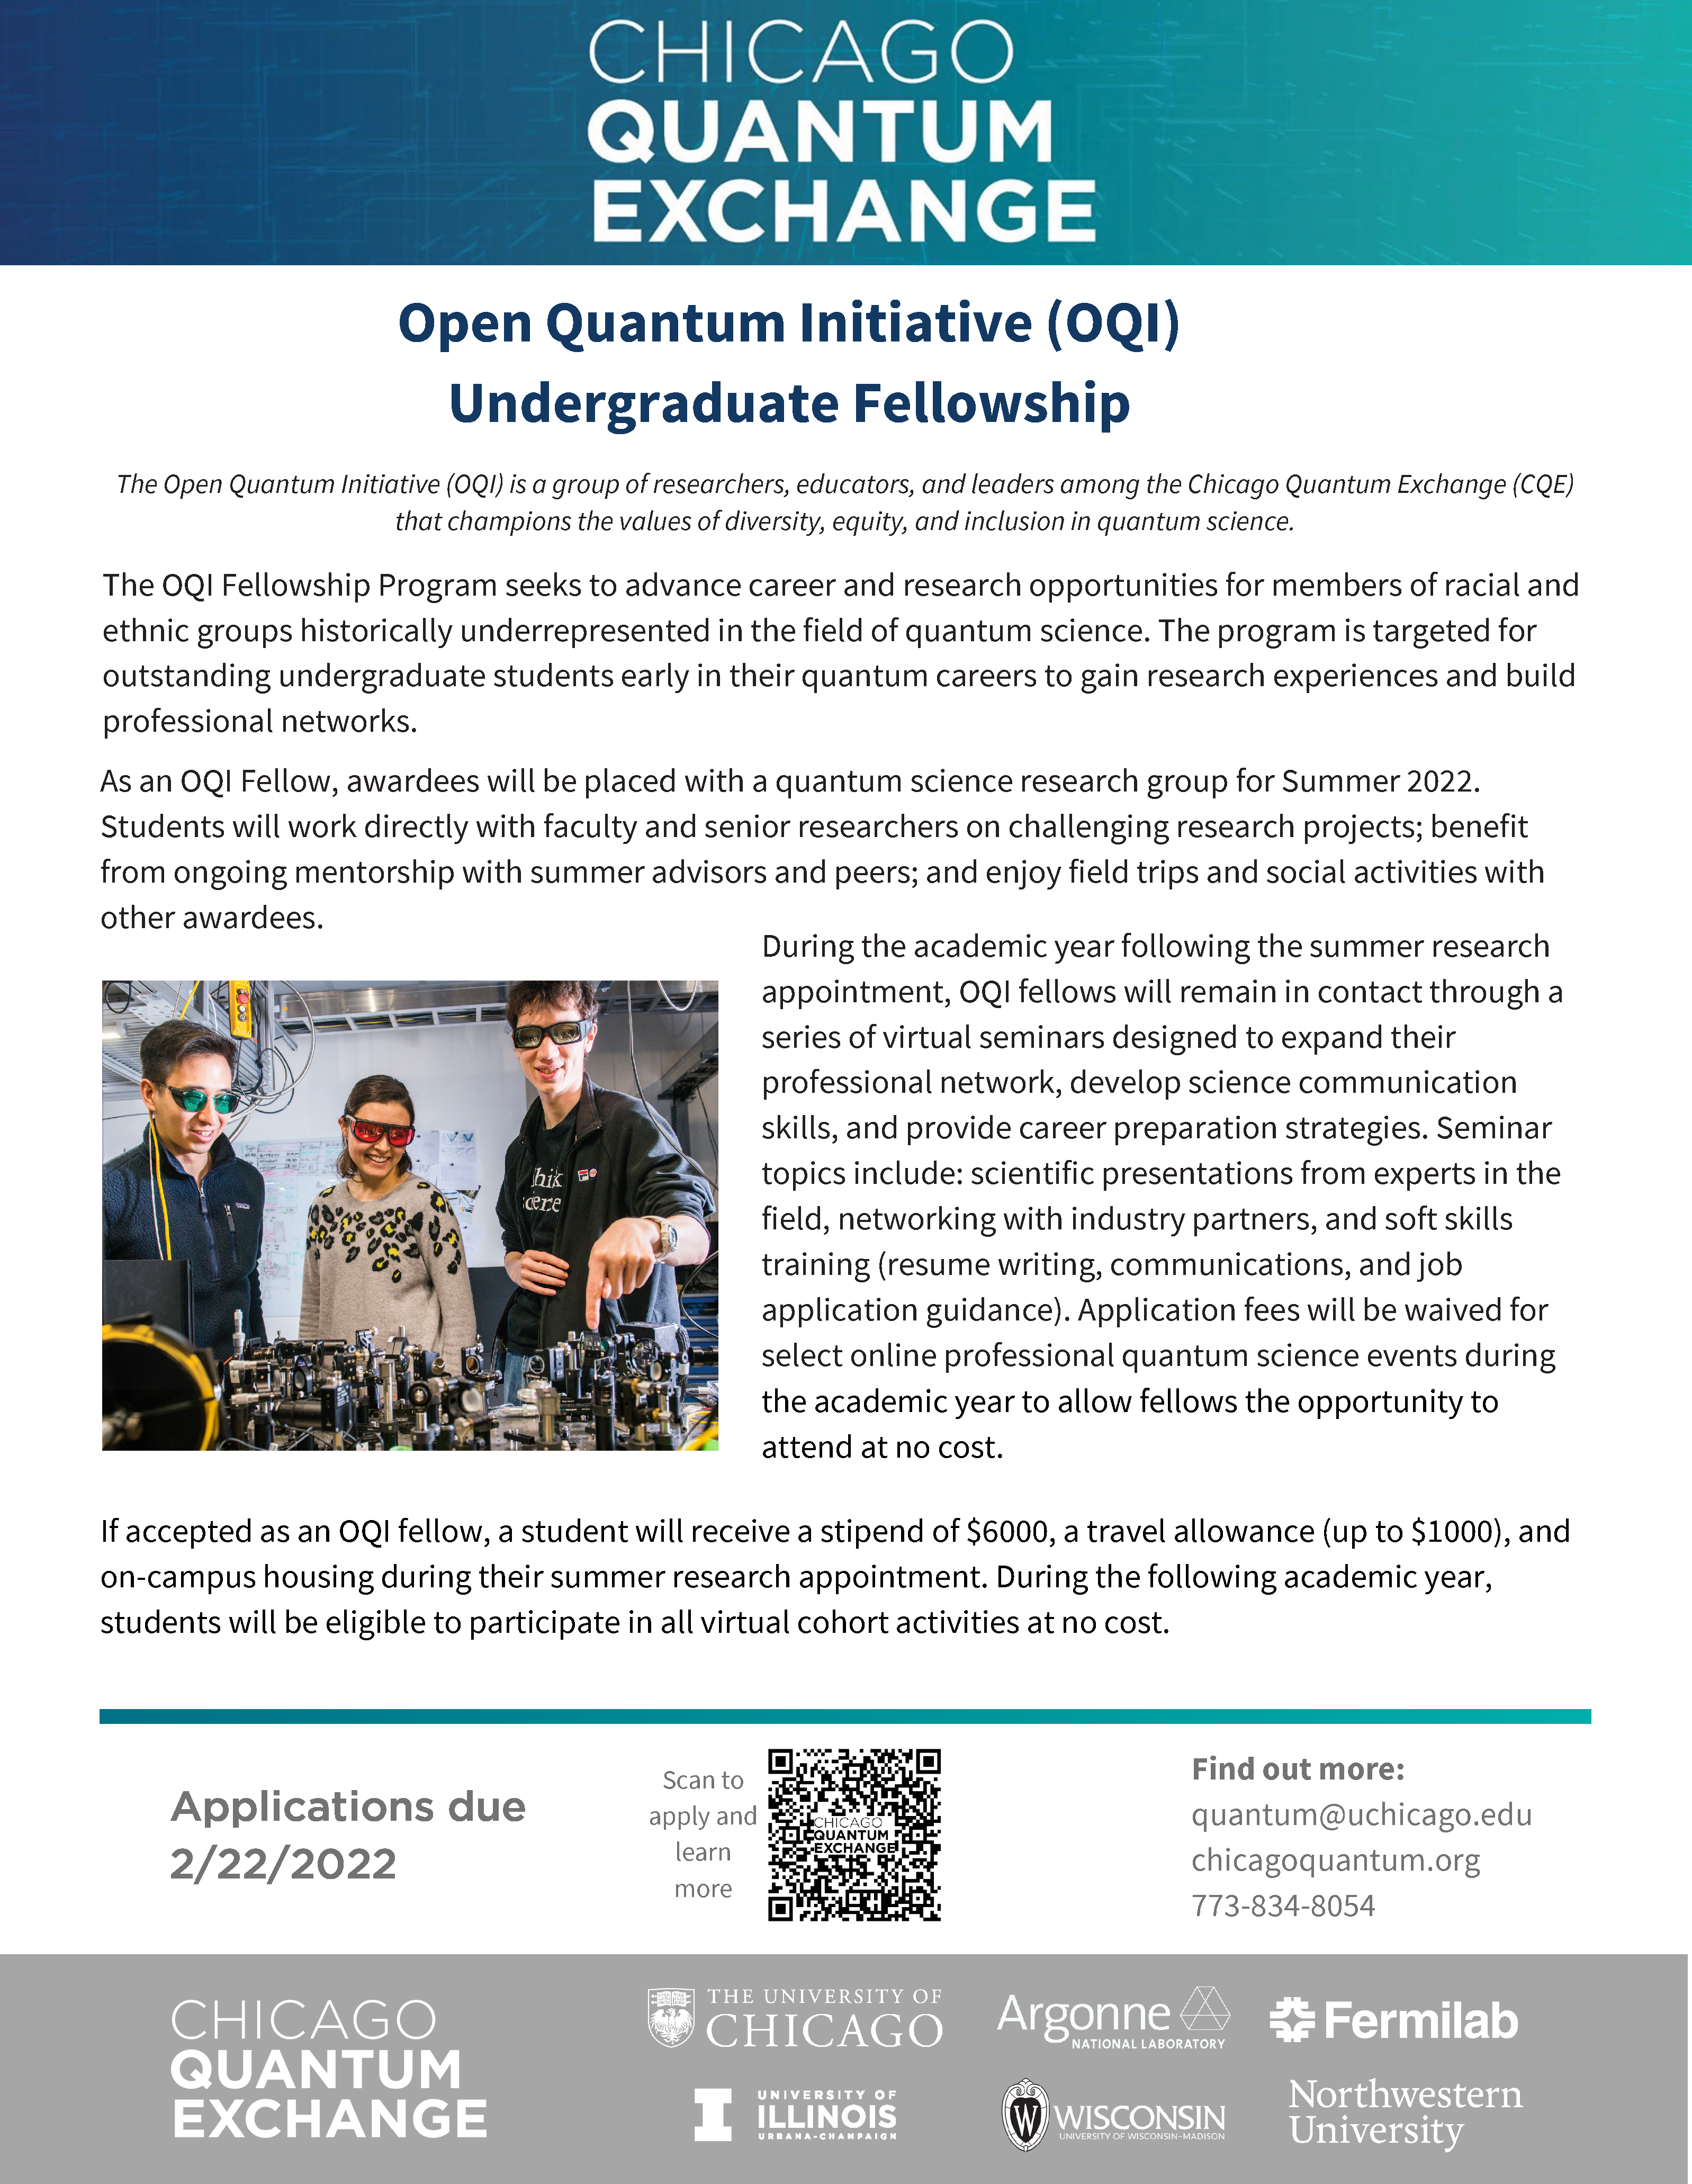 info sheet on the OQI fellowship. Text and other info can all be found at the links within the story